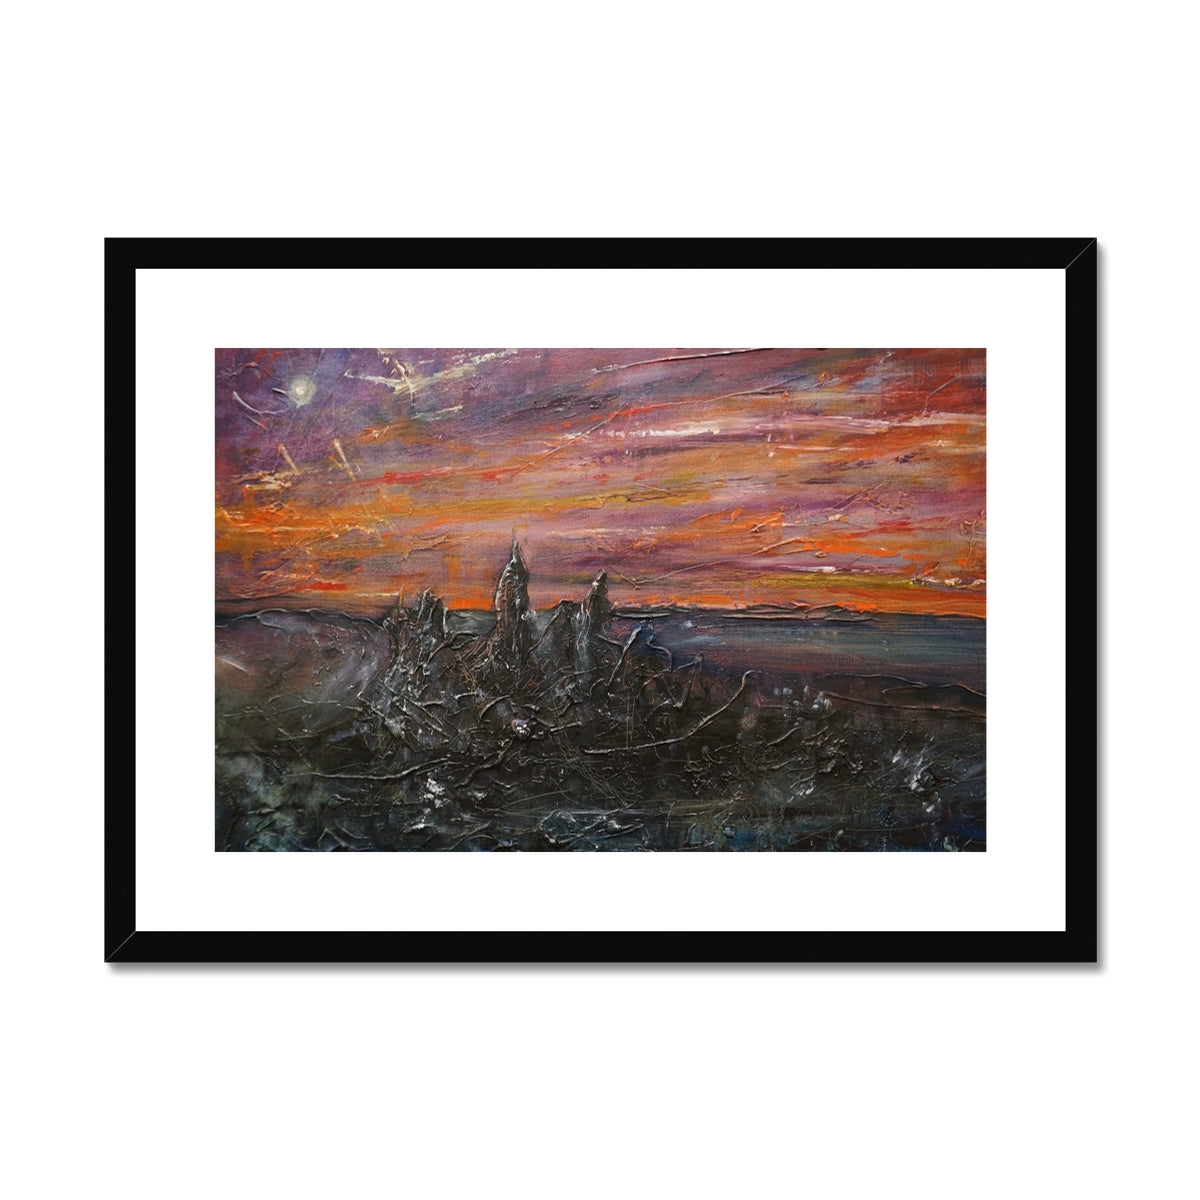 Storr Moonlight Skye Painting | Framed & Mounted Prints From Scotland-Framed & Mounted Prints-Skye Art Gallery-A2 Landscape-Black Frame-Paintings, Prints, Homeware, Art Gifts From Scotland By Scottish Artist Kevin Hunter